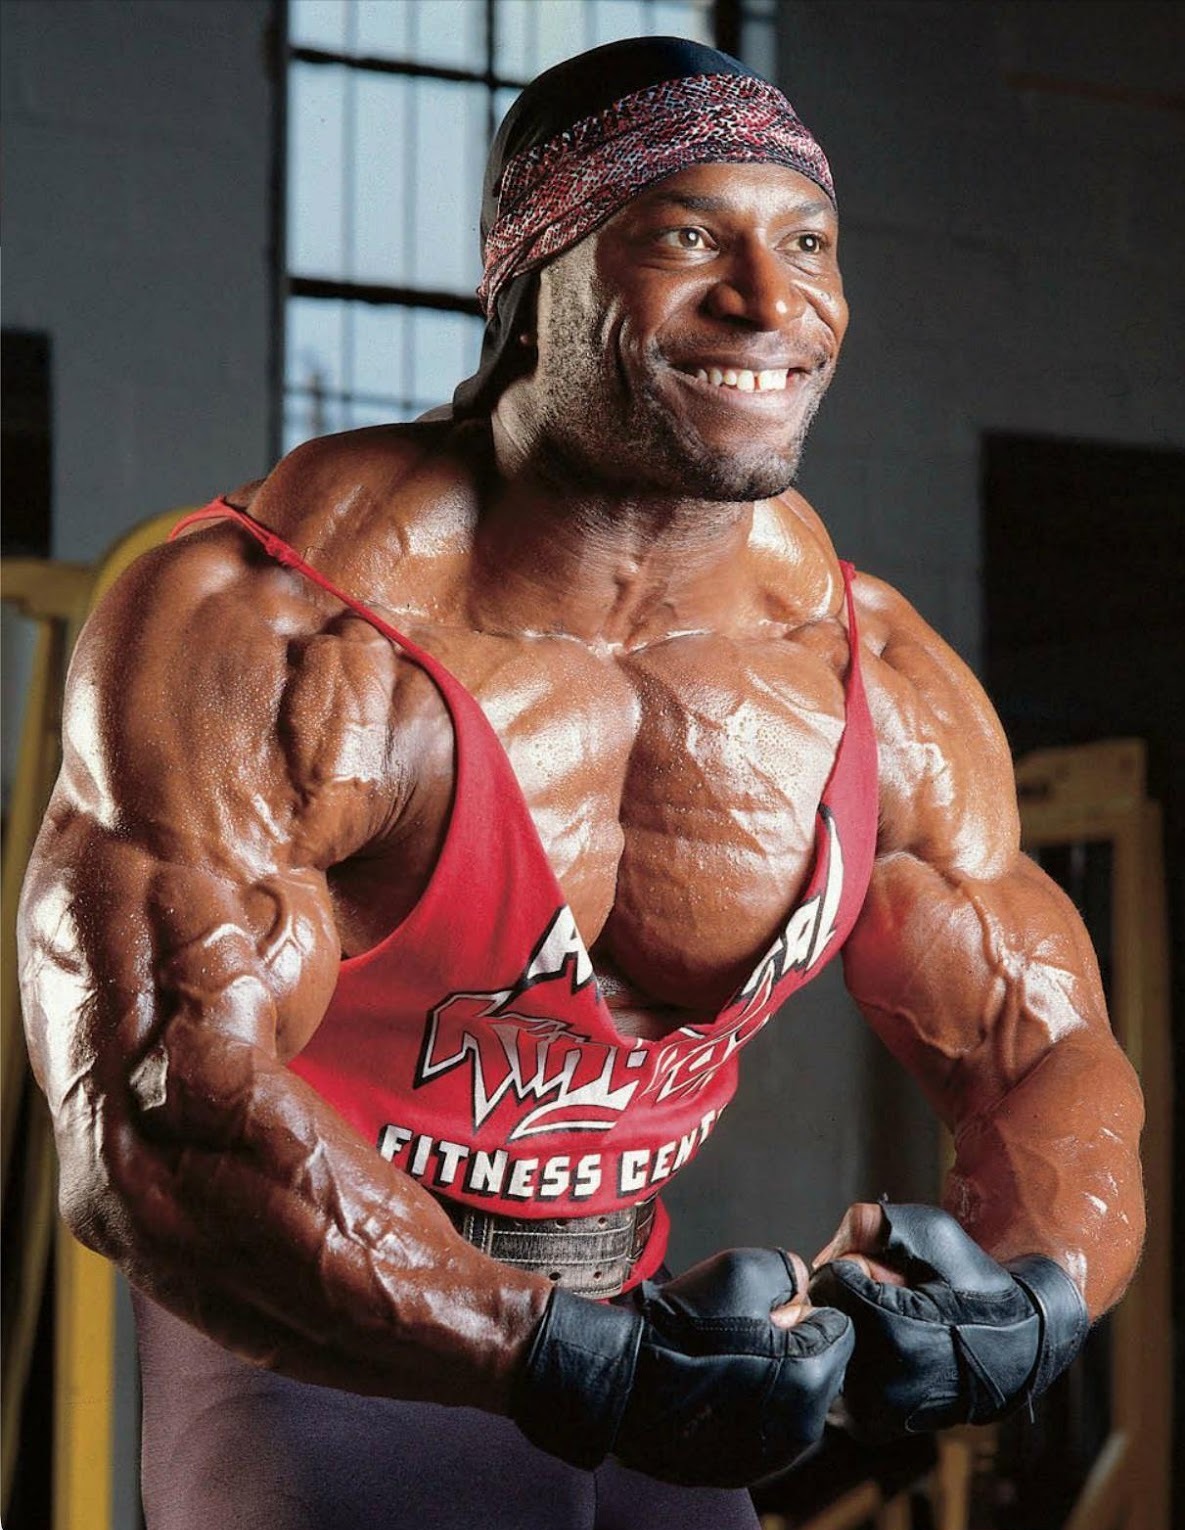 body builder lee haney Mr olympia flexing muscles in the gym